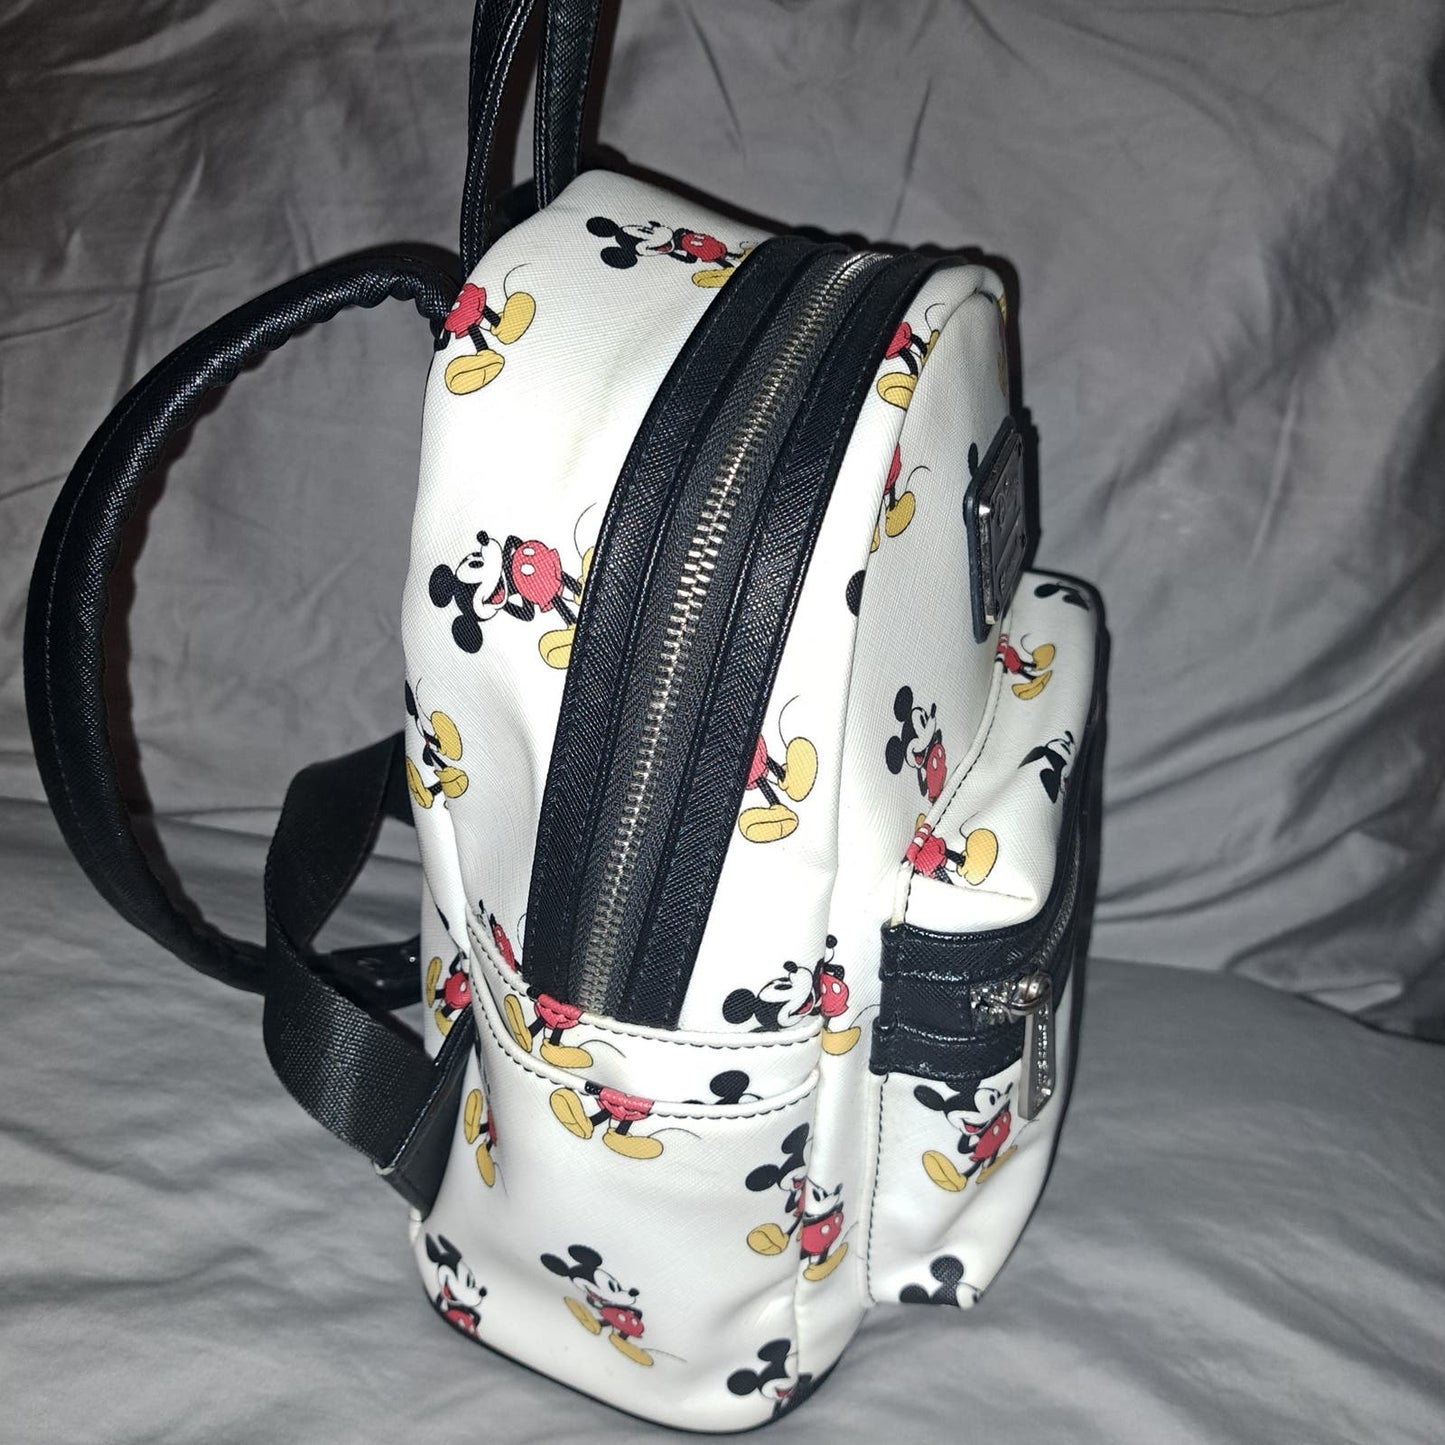 SALE!!! FUN and FABULOUS CLASSIC Mickey - LoungeFly Mini Backpack Pre-owned